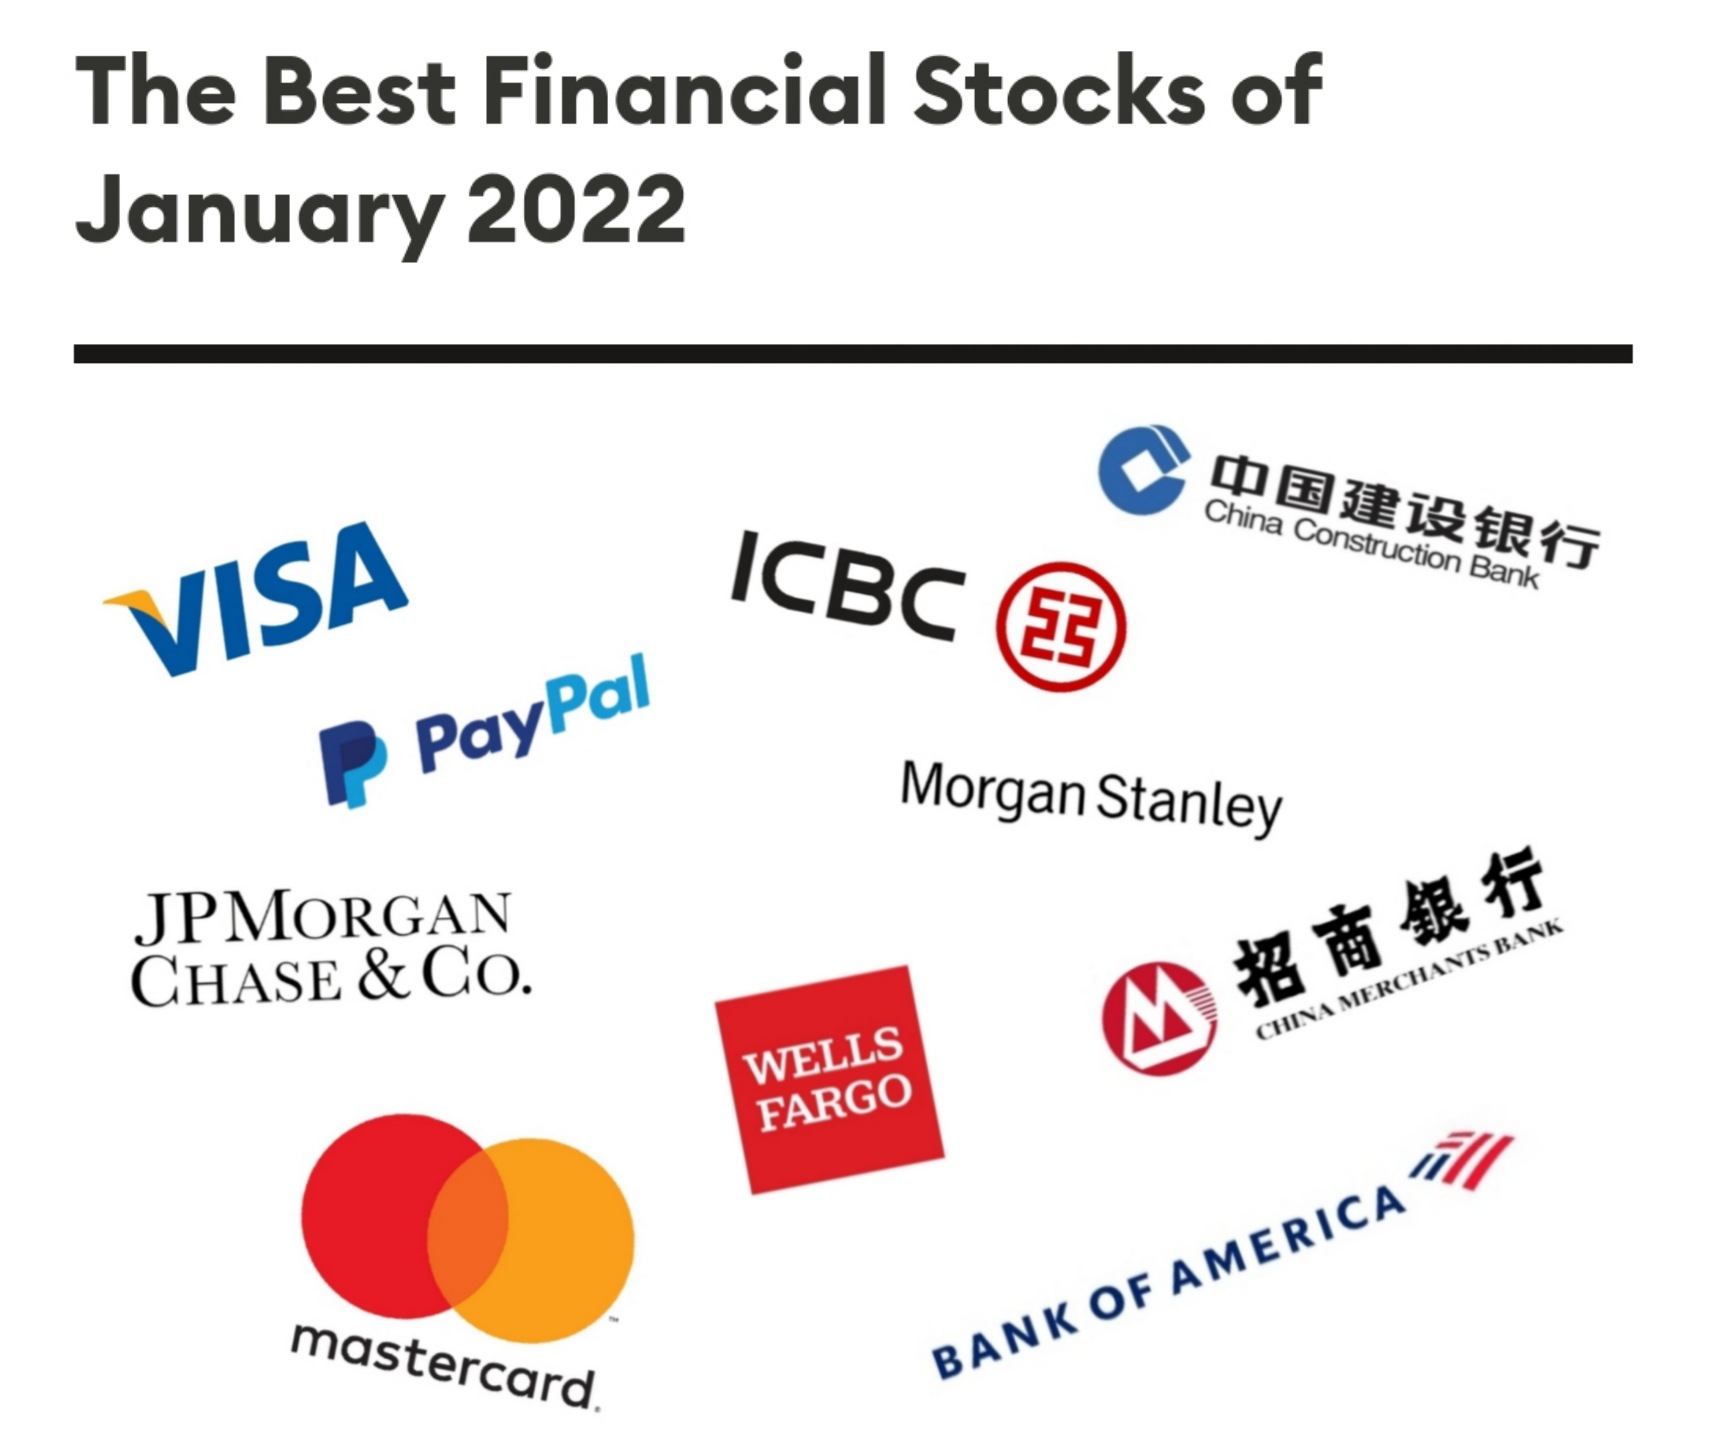 The best financial Stocks of January 2022